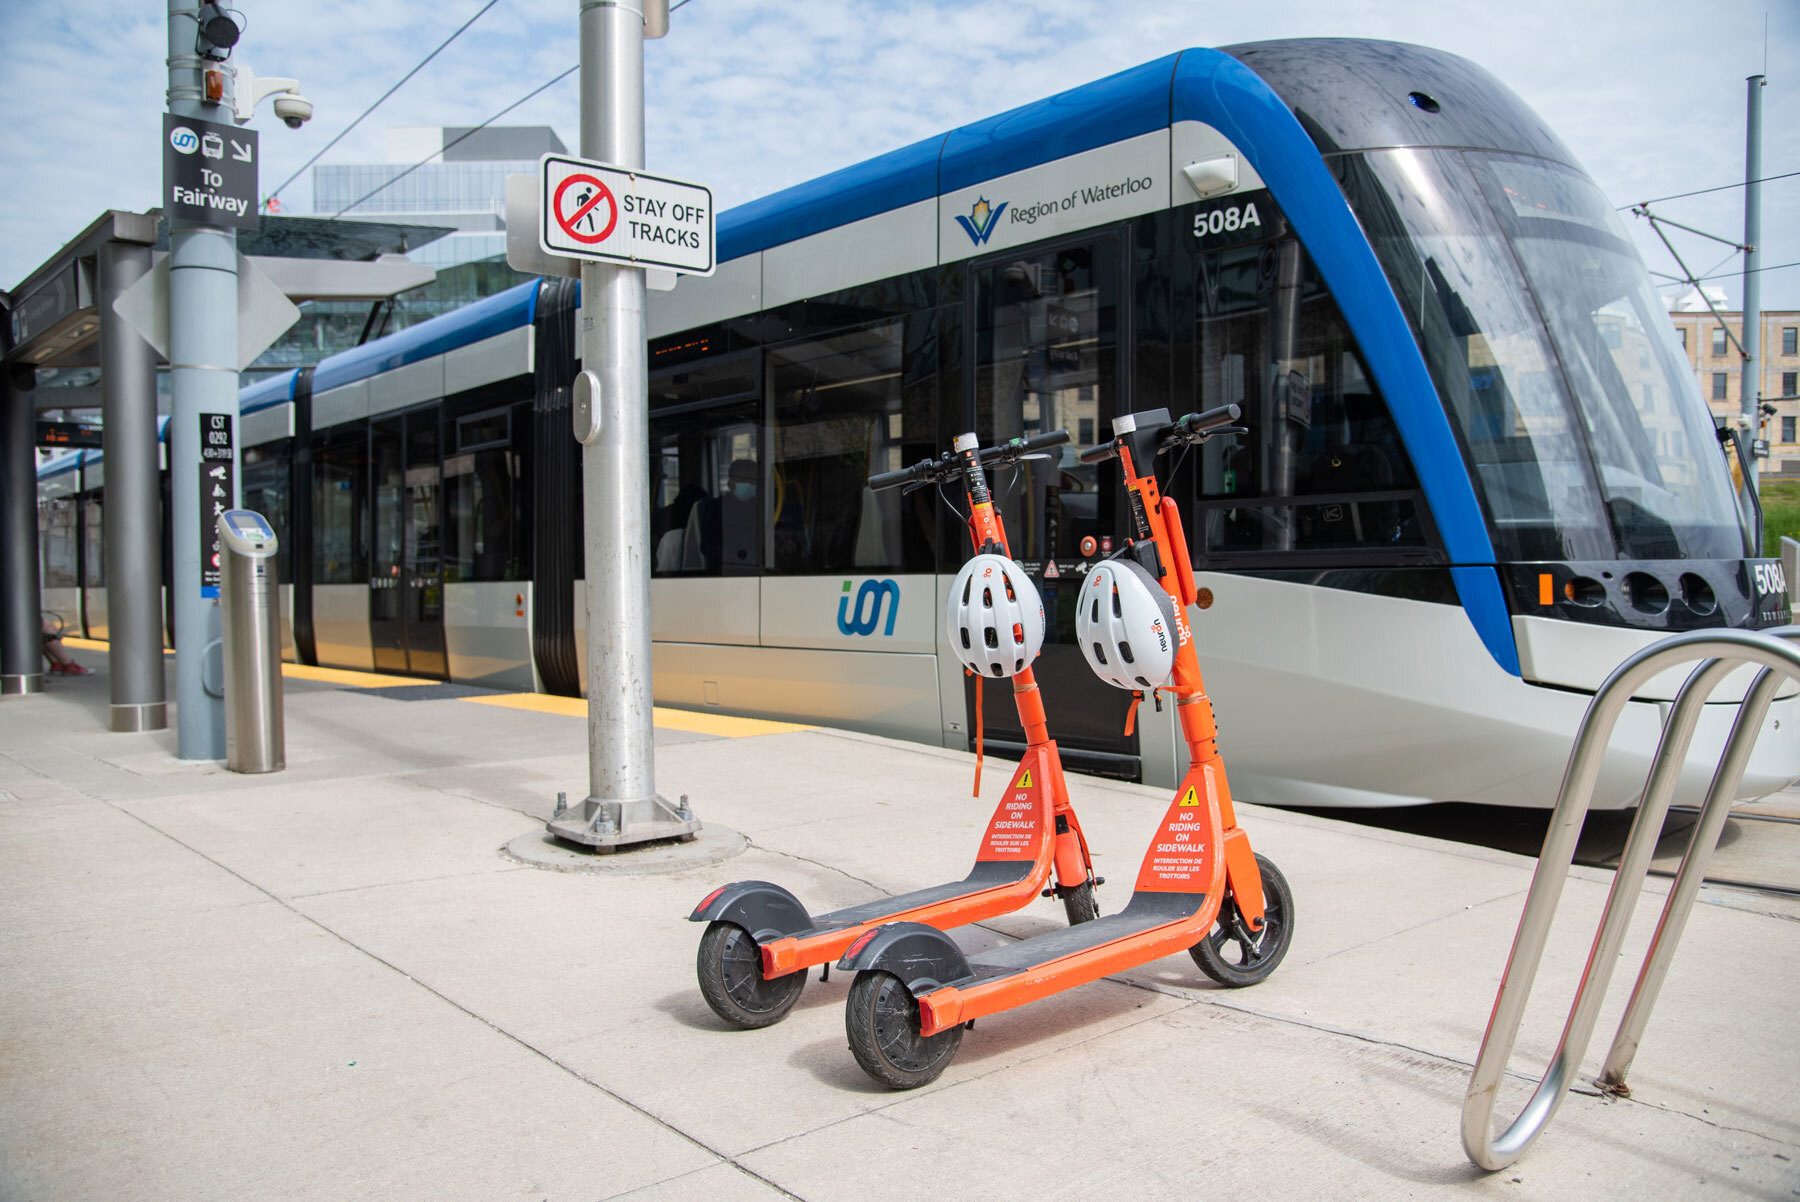 Image of two Neuron scooters parked next to the ION